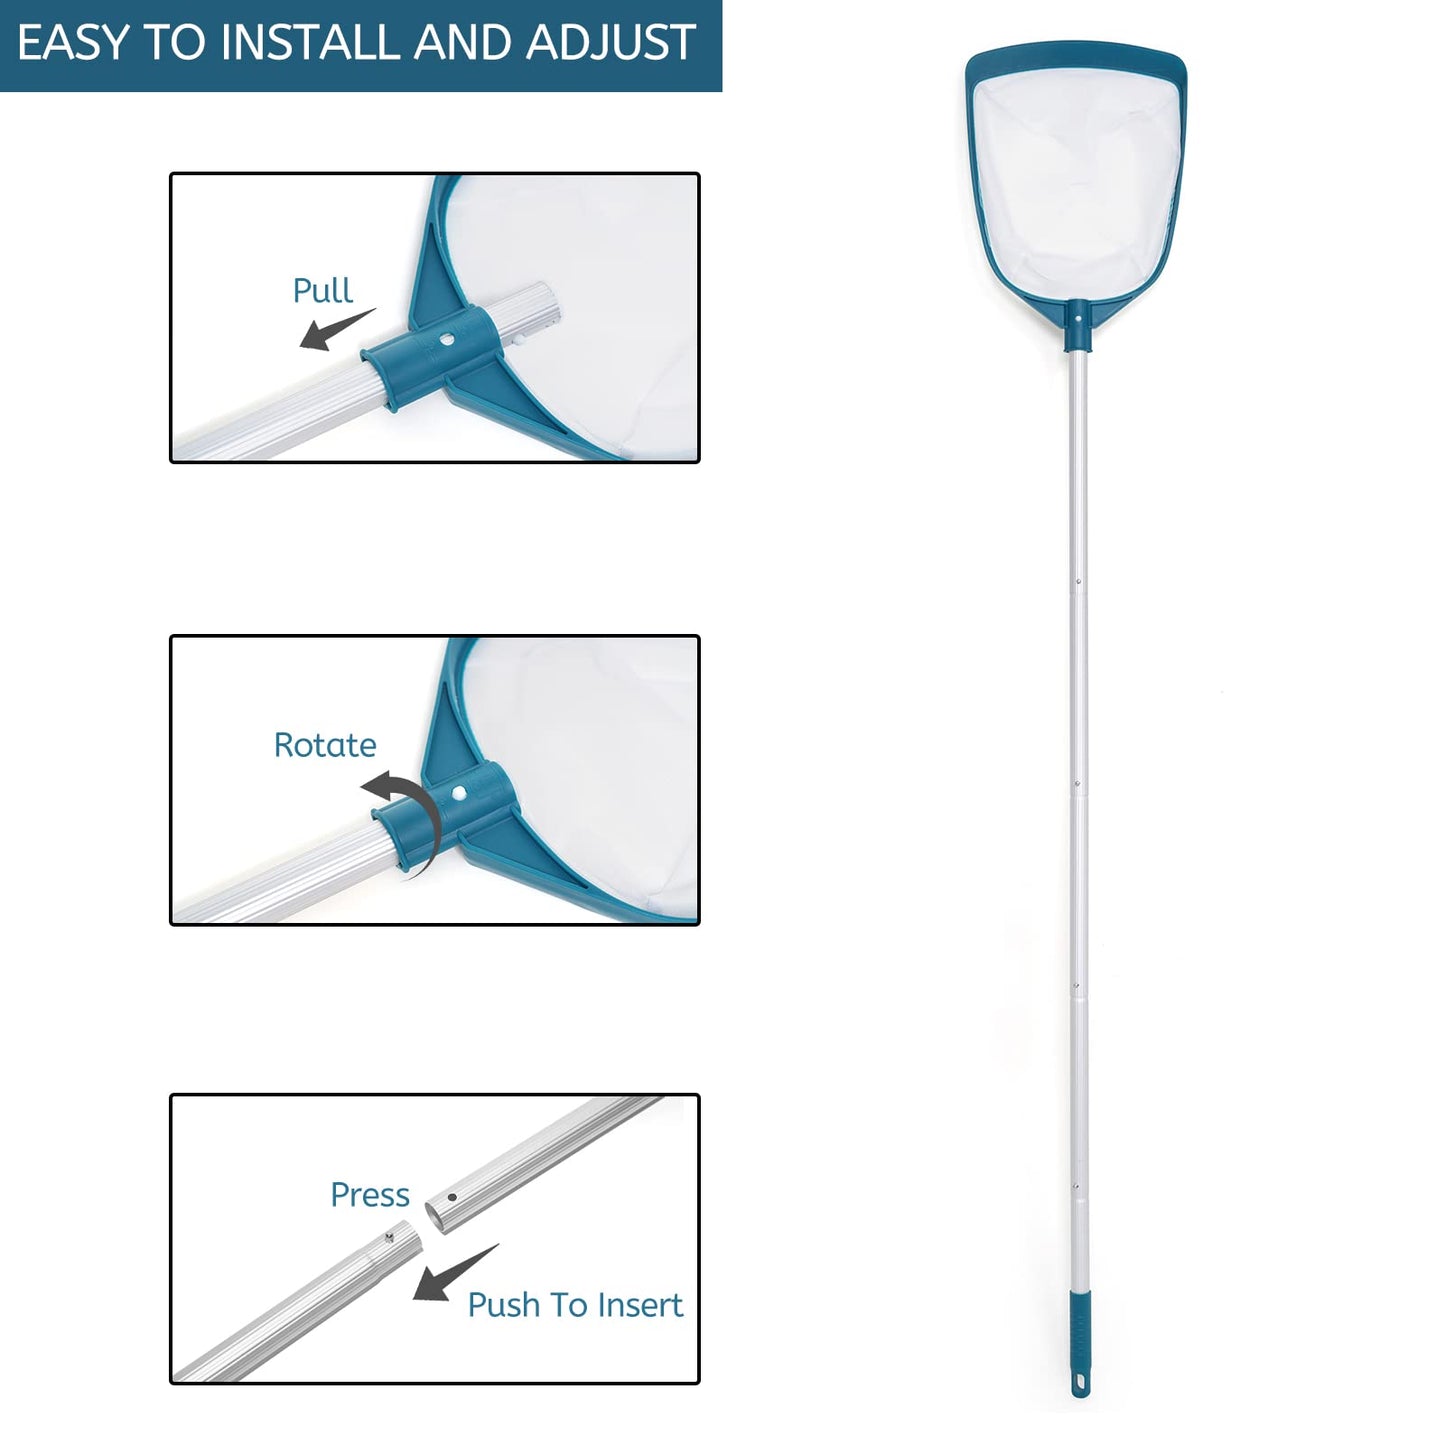 POOLWHALE Upgrades Swimming Pool Telescopic Leaf Net Skimmer Rake with Adjustable Aluminum Pole and Nylon Medium Fine Mesh for Cleaning Swimming Pools, Hot Tubs, Spas and Fountains Pool Skimmer with Pole